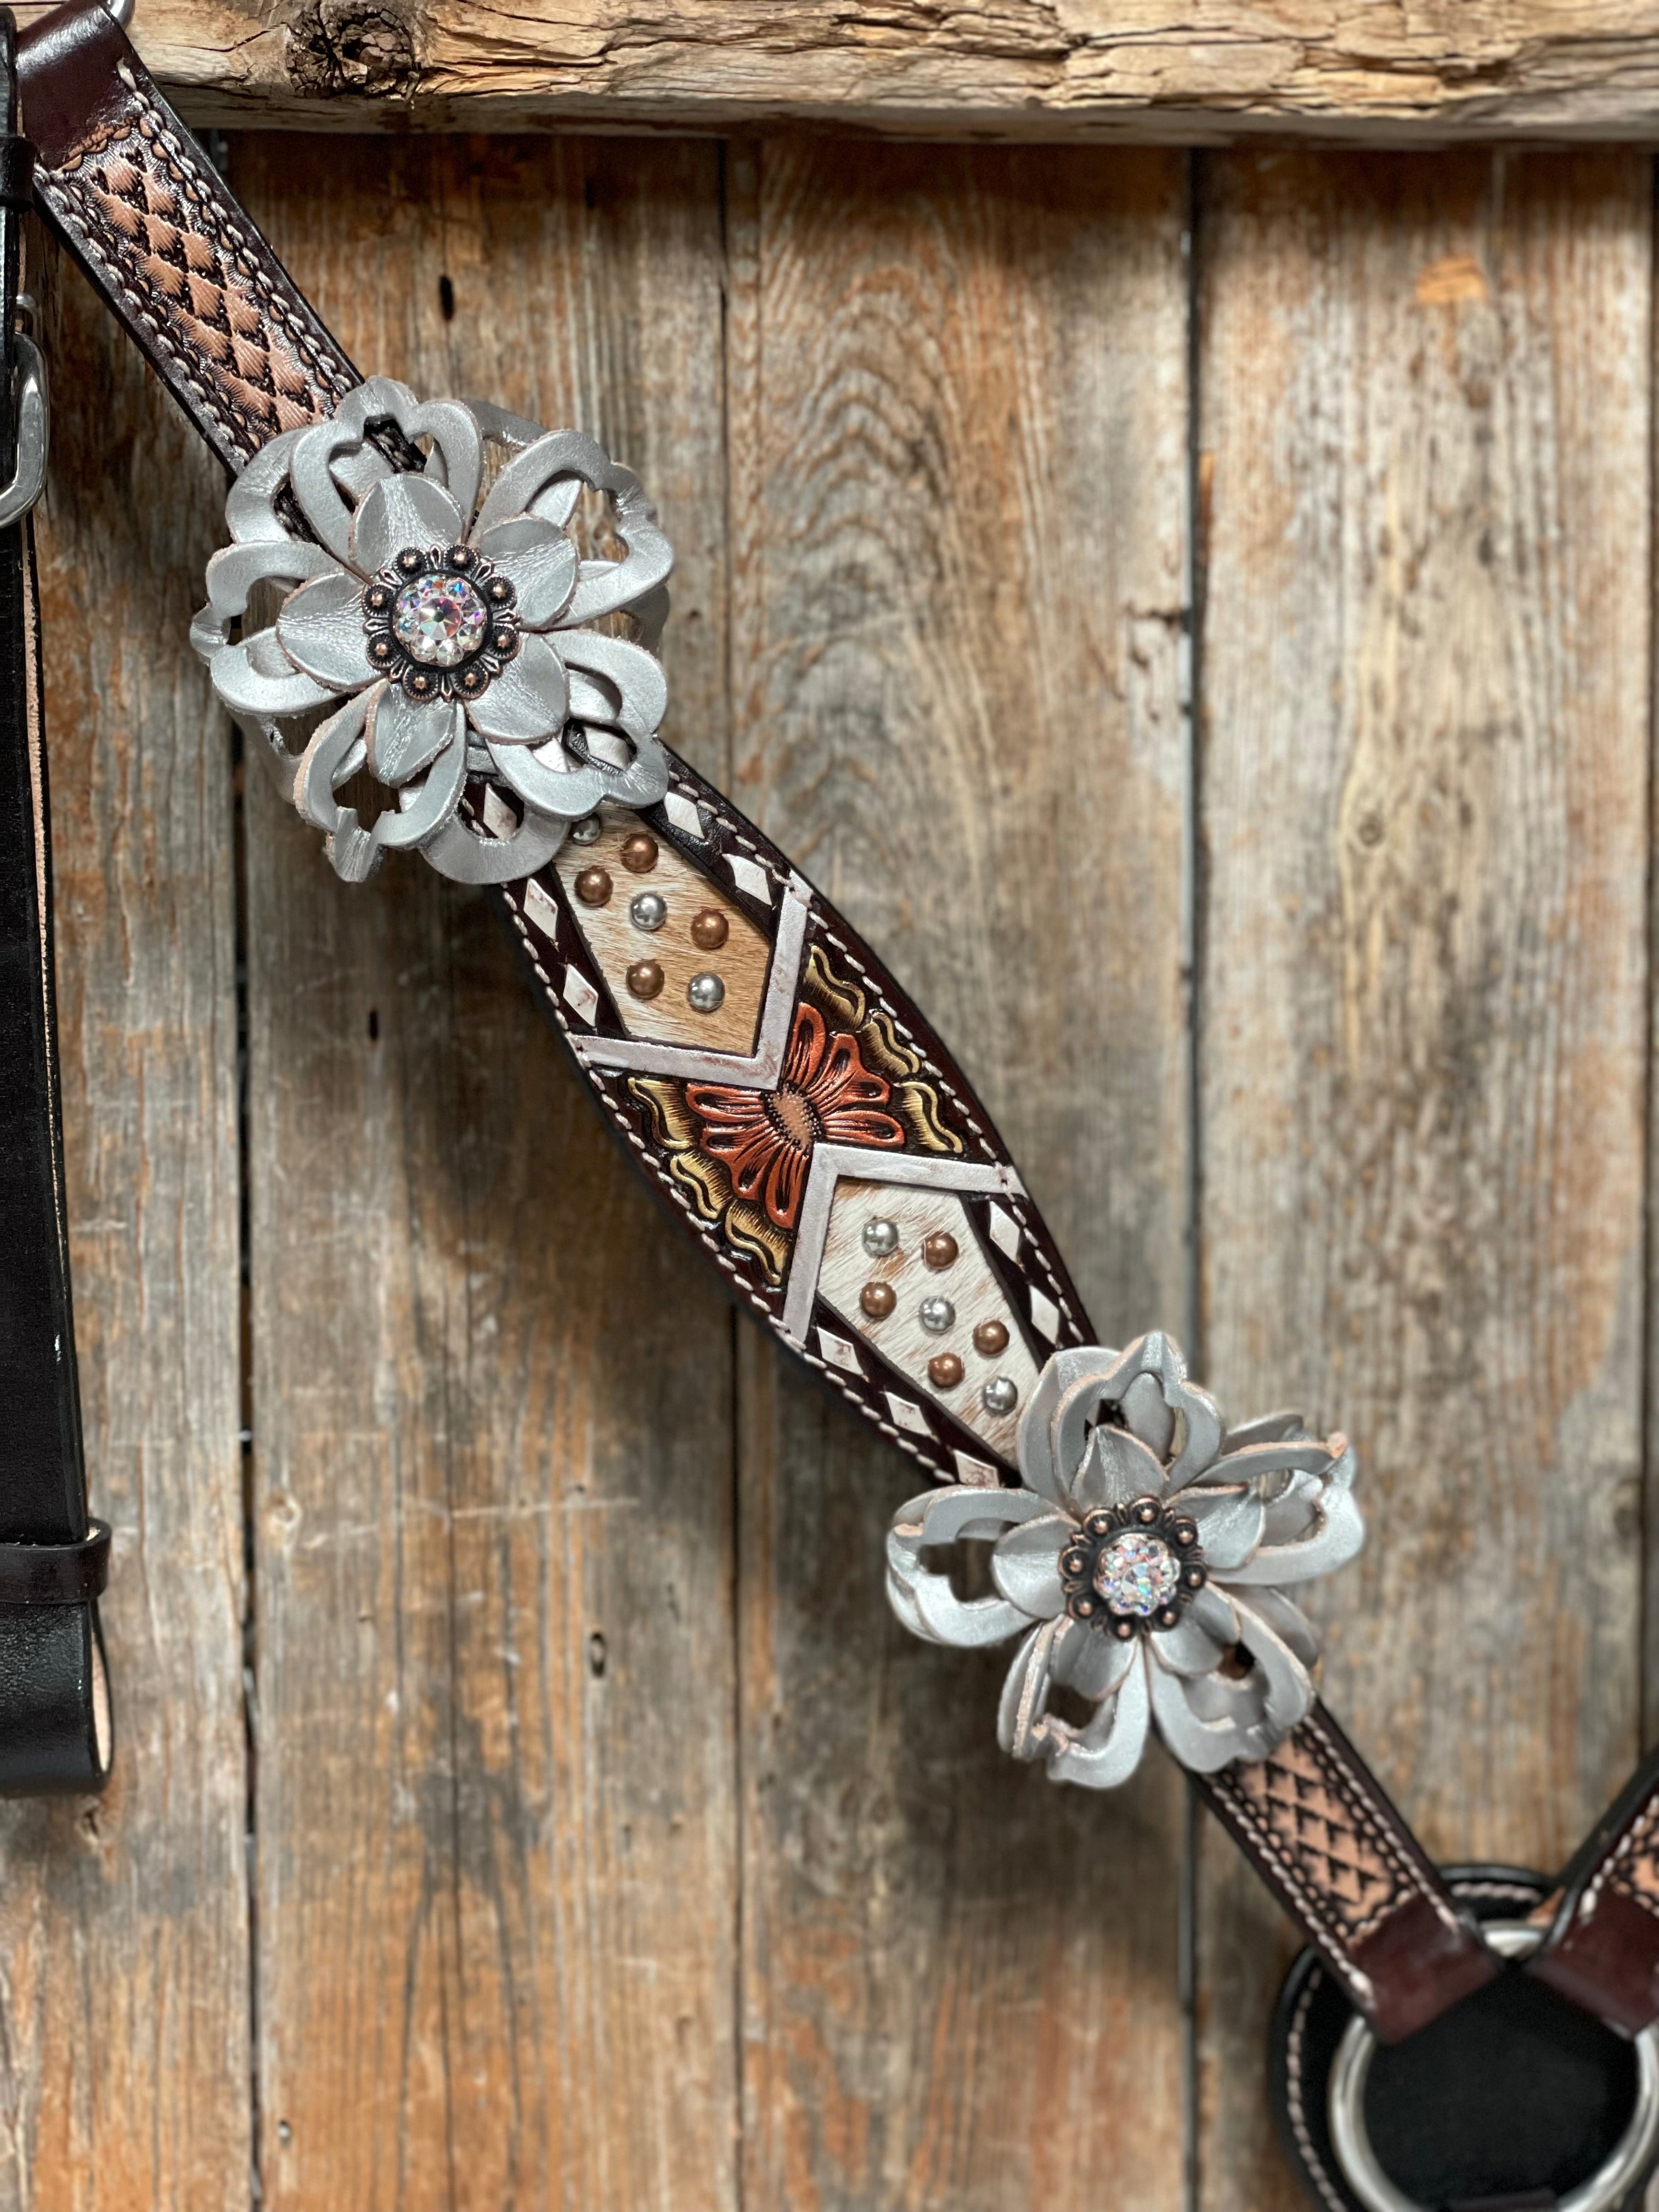 Cowhide Browband/One Ear Tack Set #BBBC493 - RODEO DRIVE